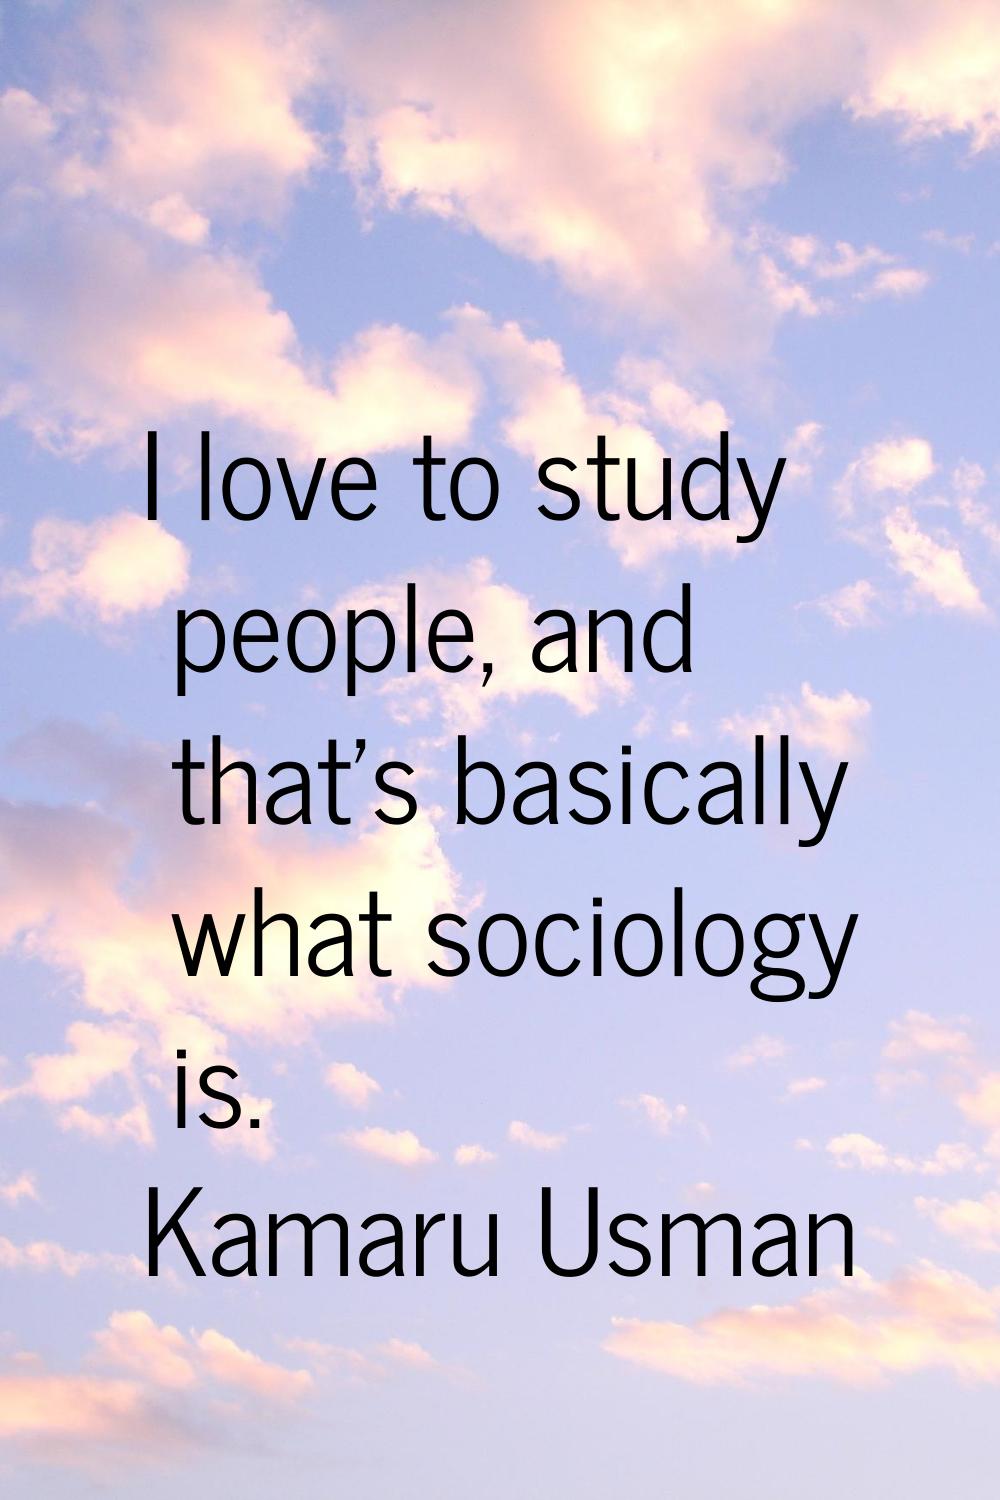 I love to study people, and that's basically what sociology is.